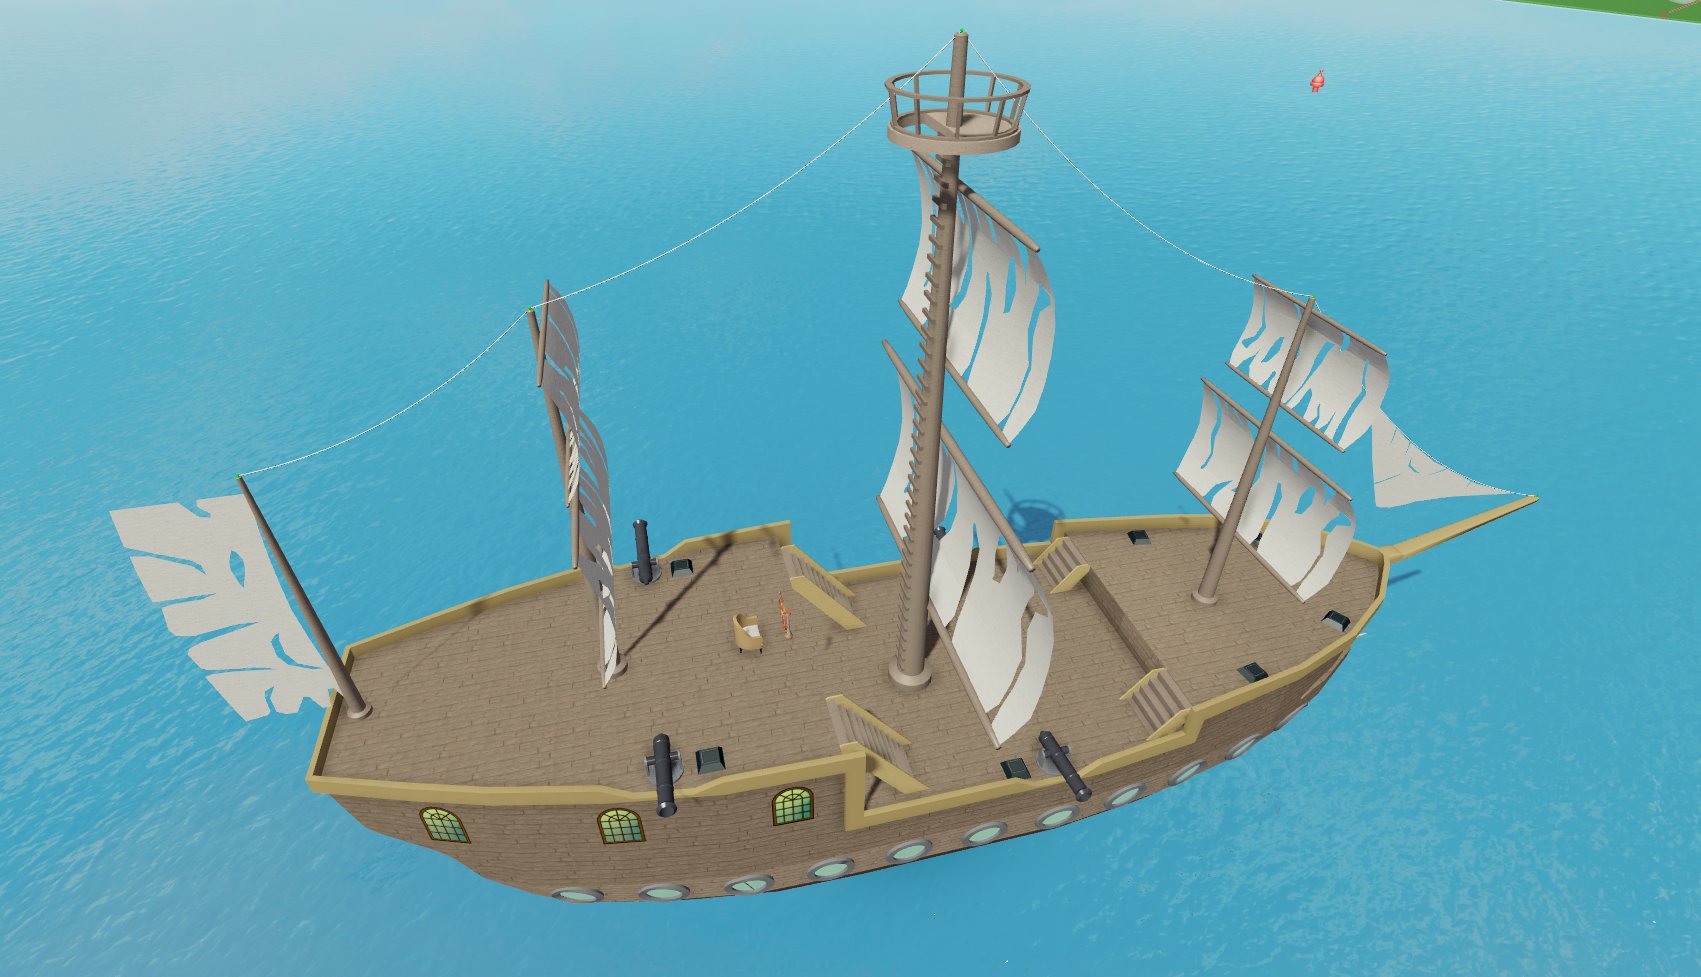 Simon On Twitter Arr You Ready For The Halloween Update The Flying Dutchman Soars Into Sharkbite Arriving In This Weekend S Update Https T Co Ljfli5ldi6 - roblox codes for sharkbite 2019 halloween